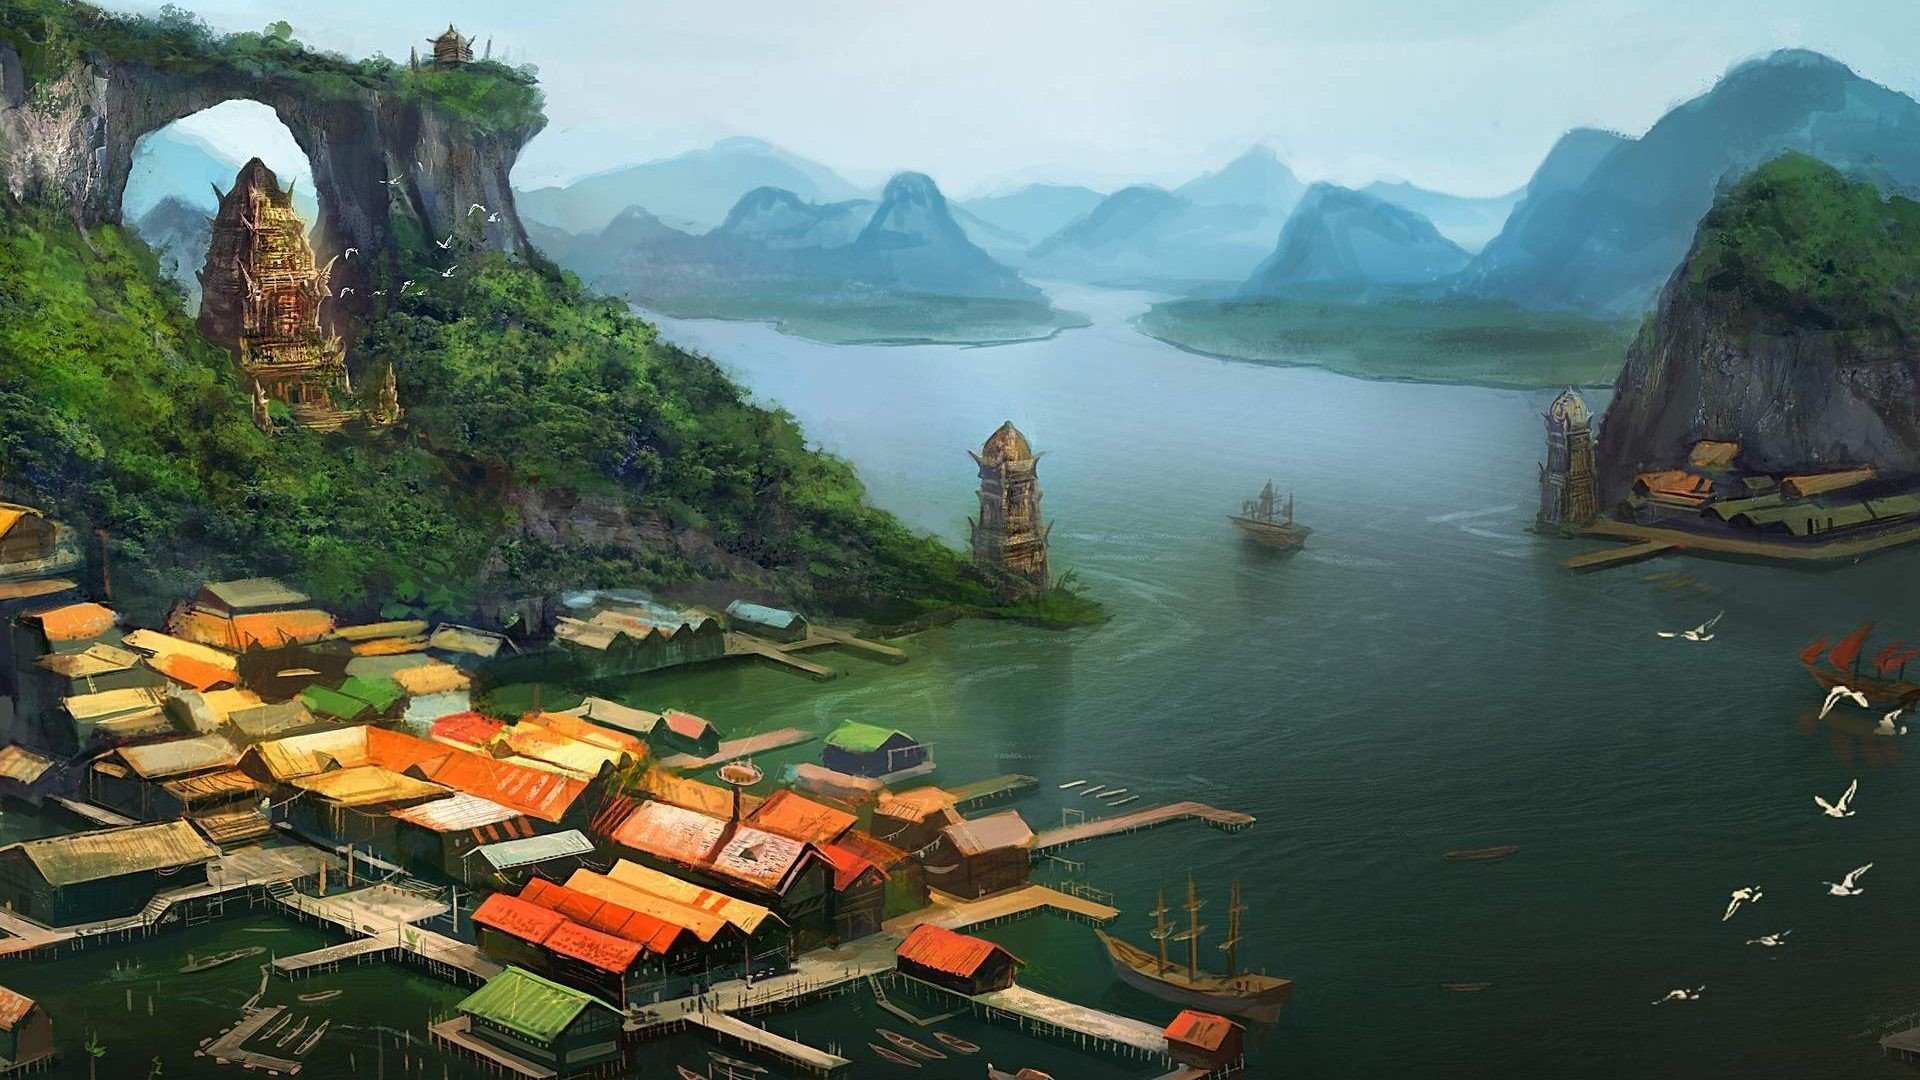 digital, Art, Fantasy, Art, Architecture, Building, House, Artwork, Painting, Rooftops, Village, Asian, Architecture, Lake, Mountains, Birds, Pier, Tower, Ship, Nature, Trees Wallpaper